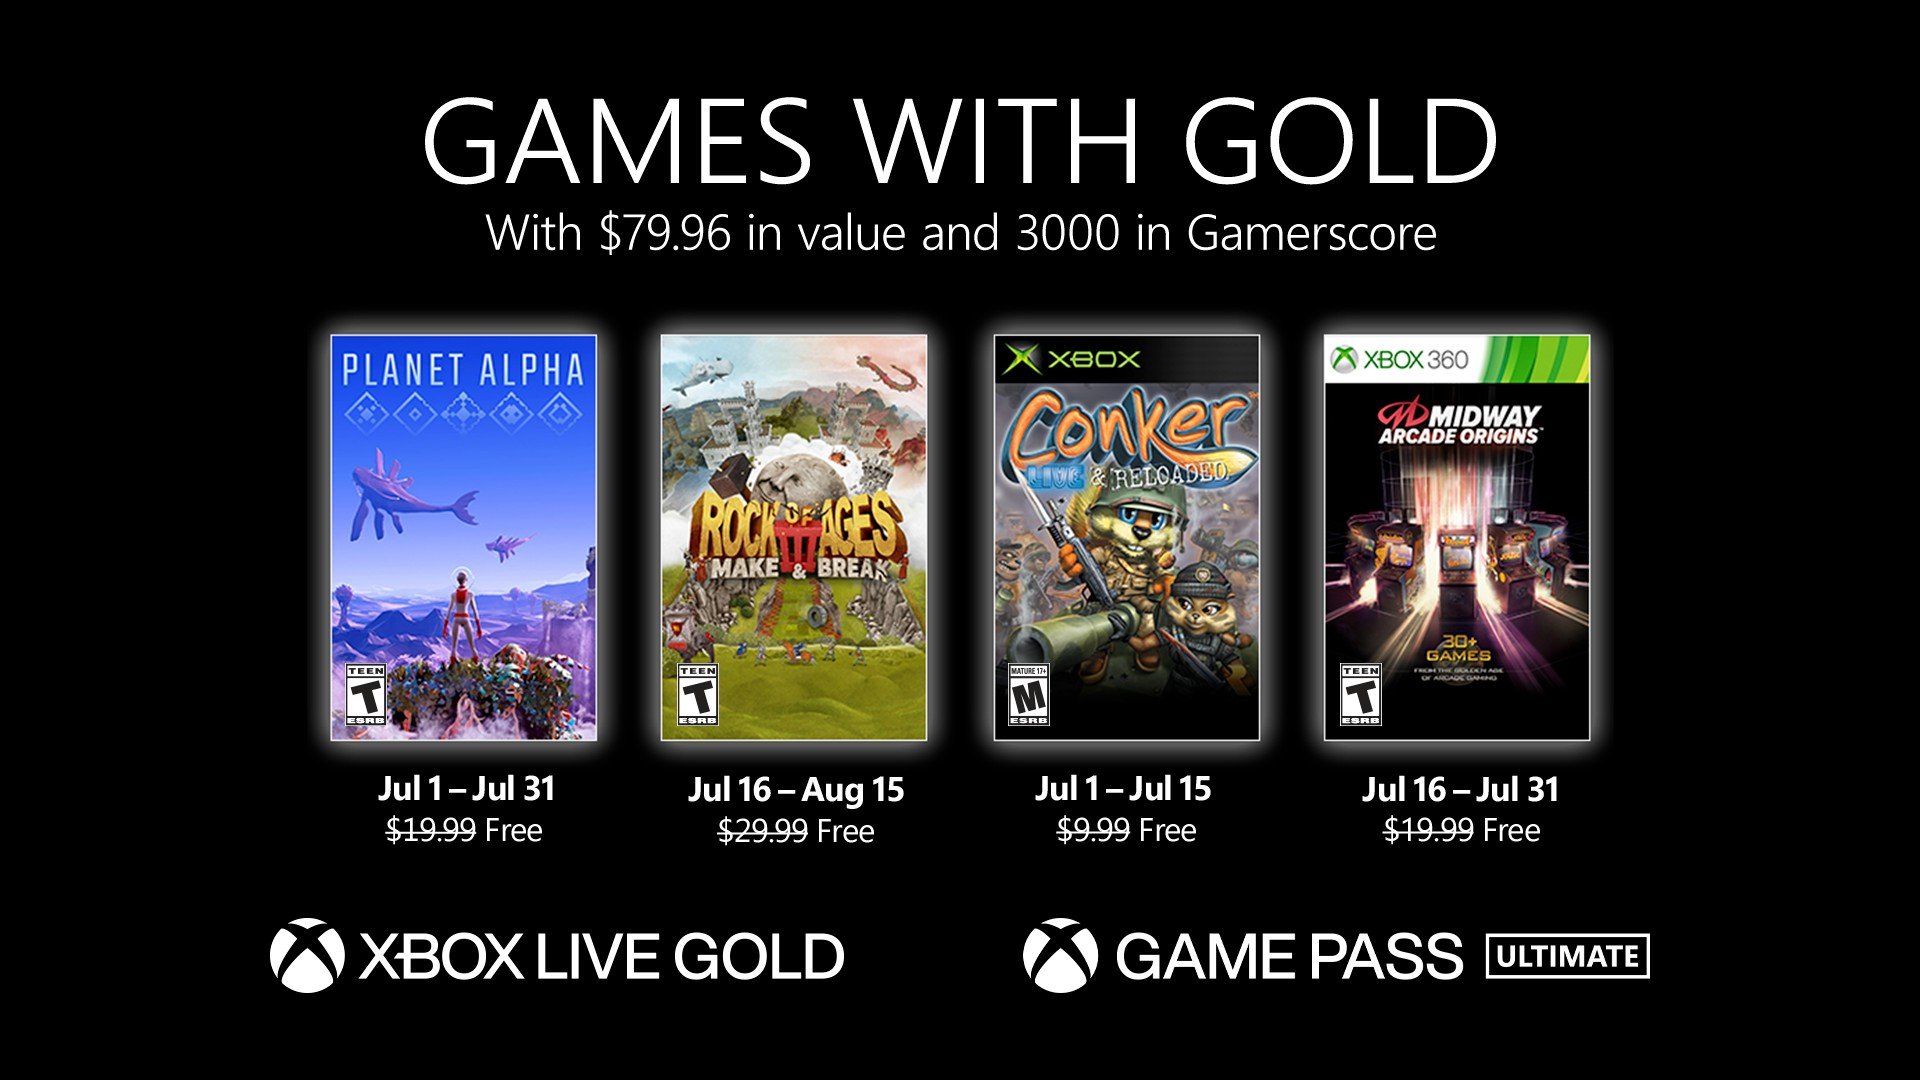 Xbox-Live-Games-with-Gold_06-29-21.jpg